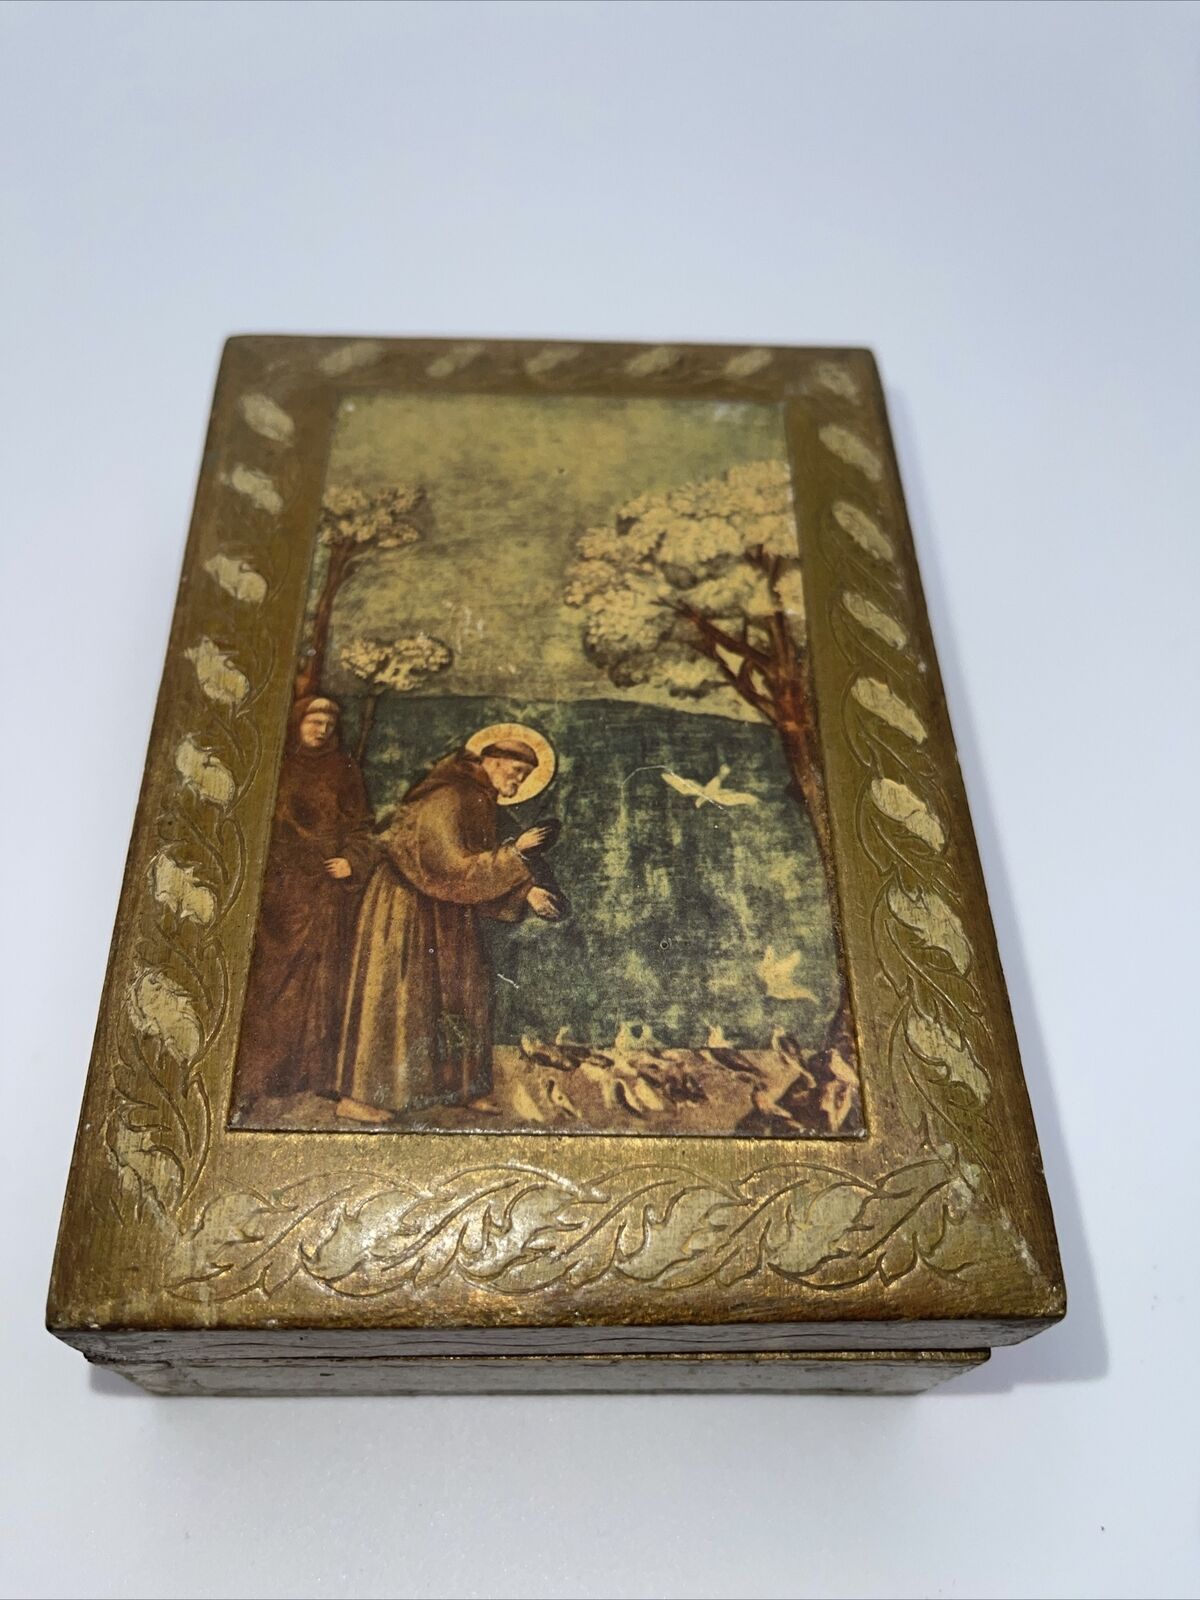 Vintage Wood Hinged Trinket Box Of St Francis Of Assisi “Preaching To The Birds”